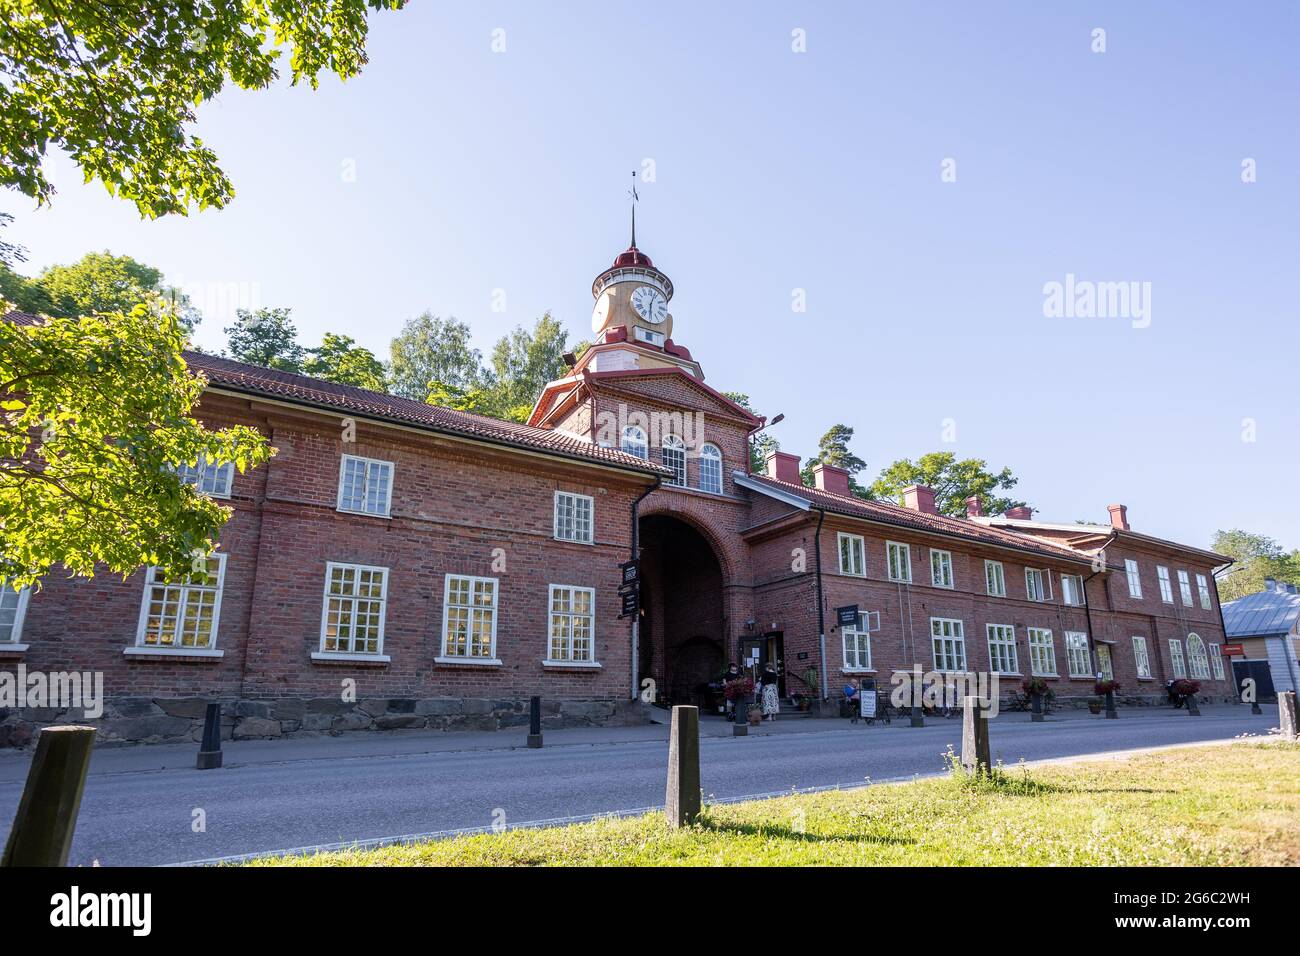 The clock tower building in Fiskars village, a historical ironworks area and popular travel destination. Stock Photo